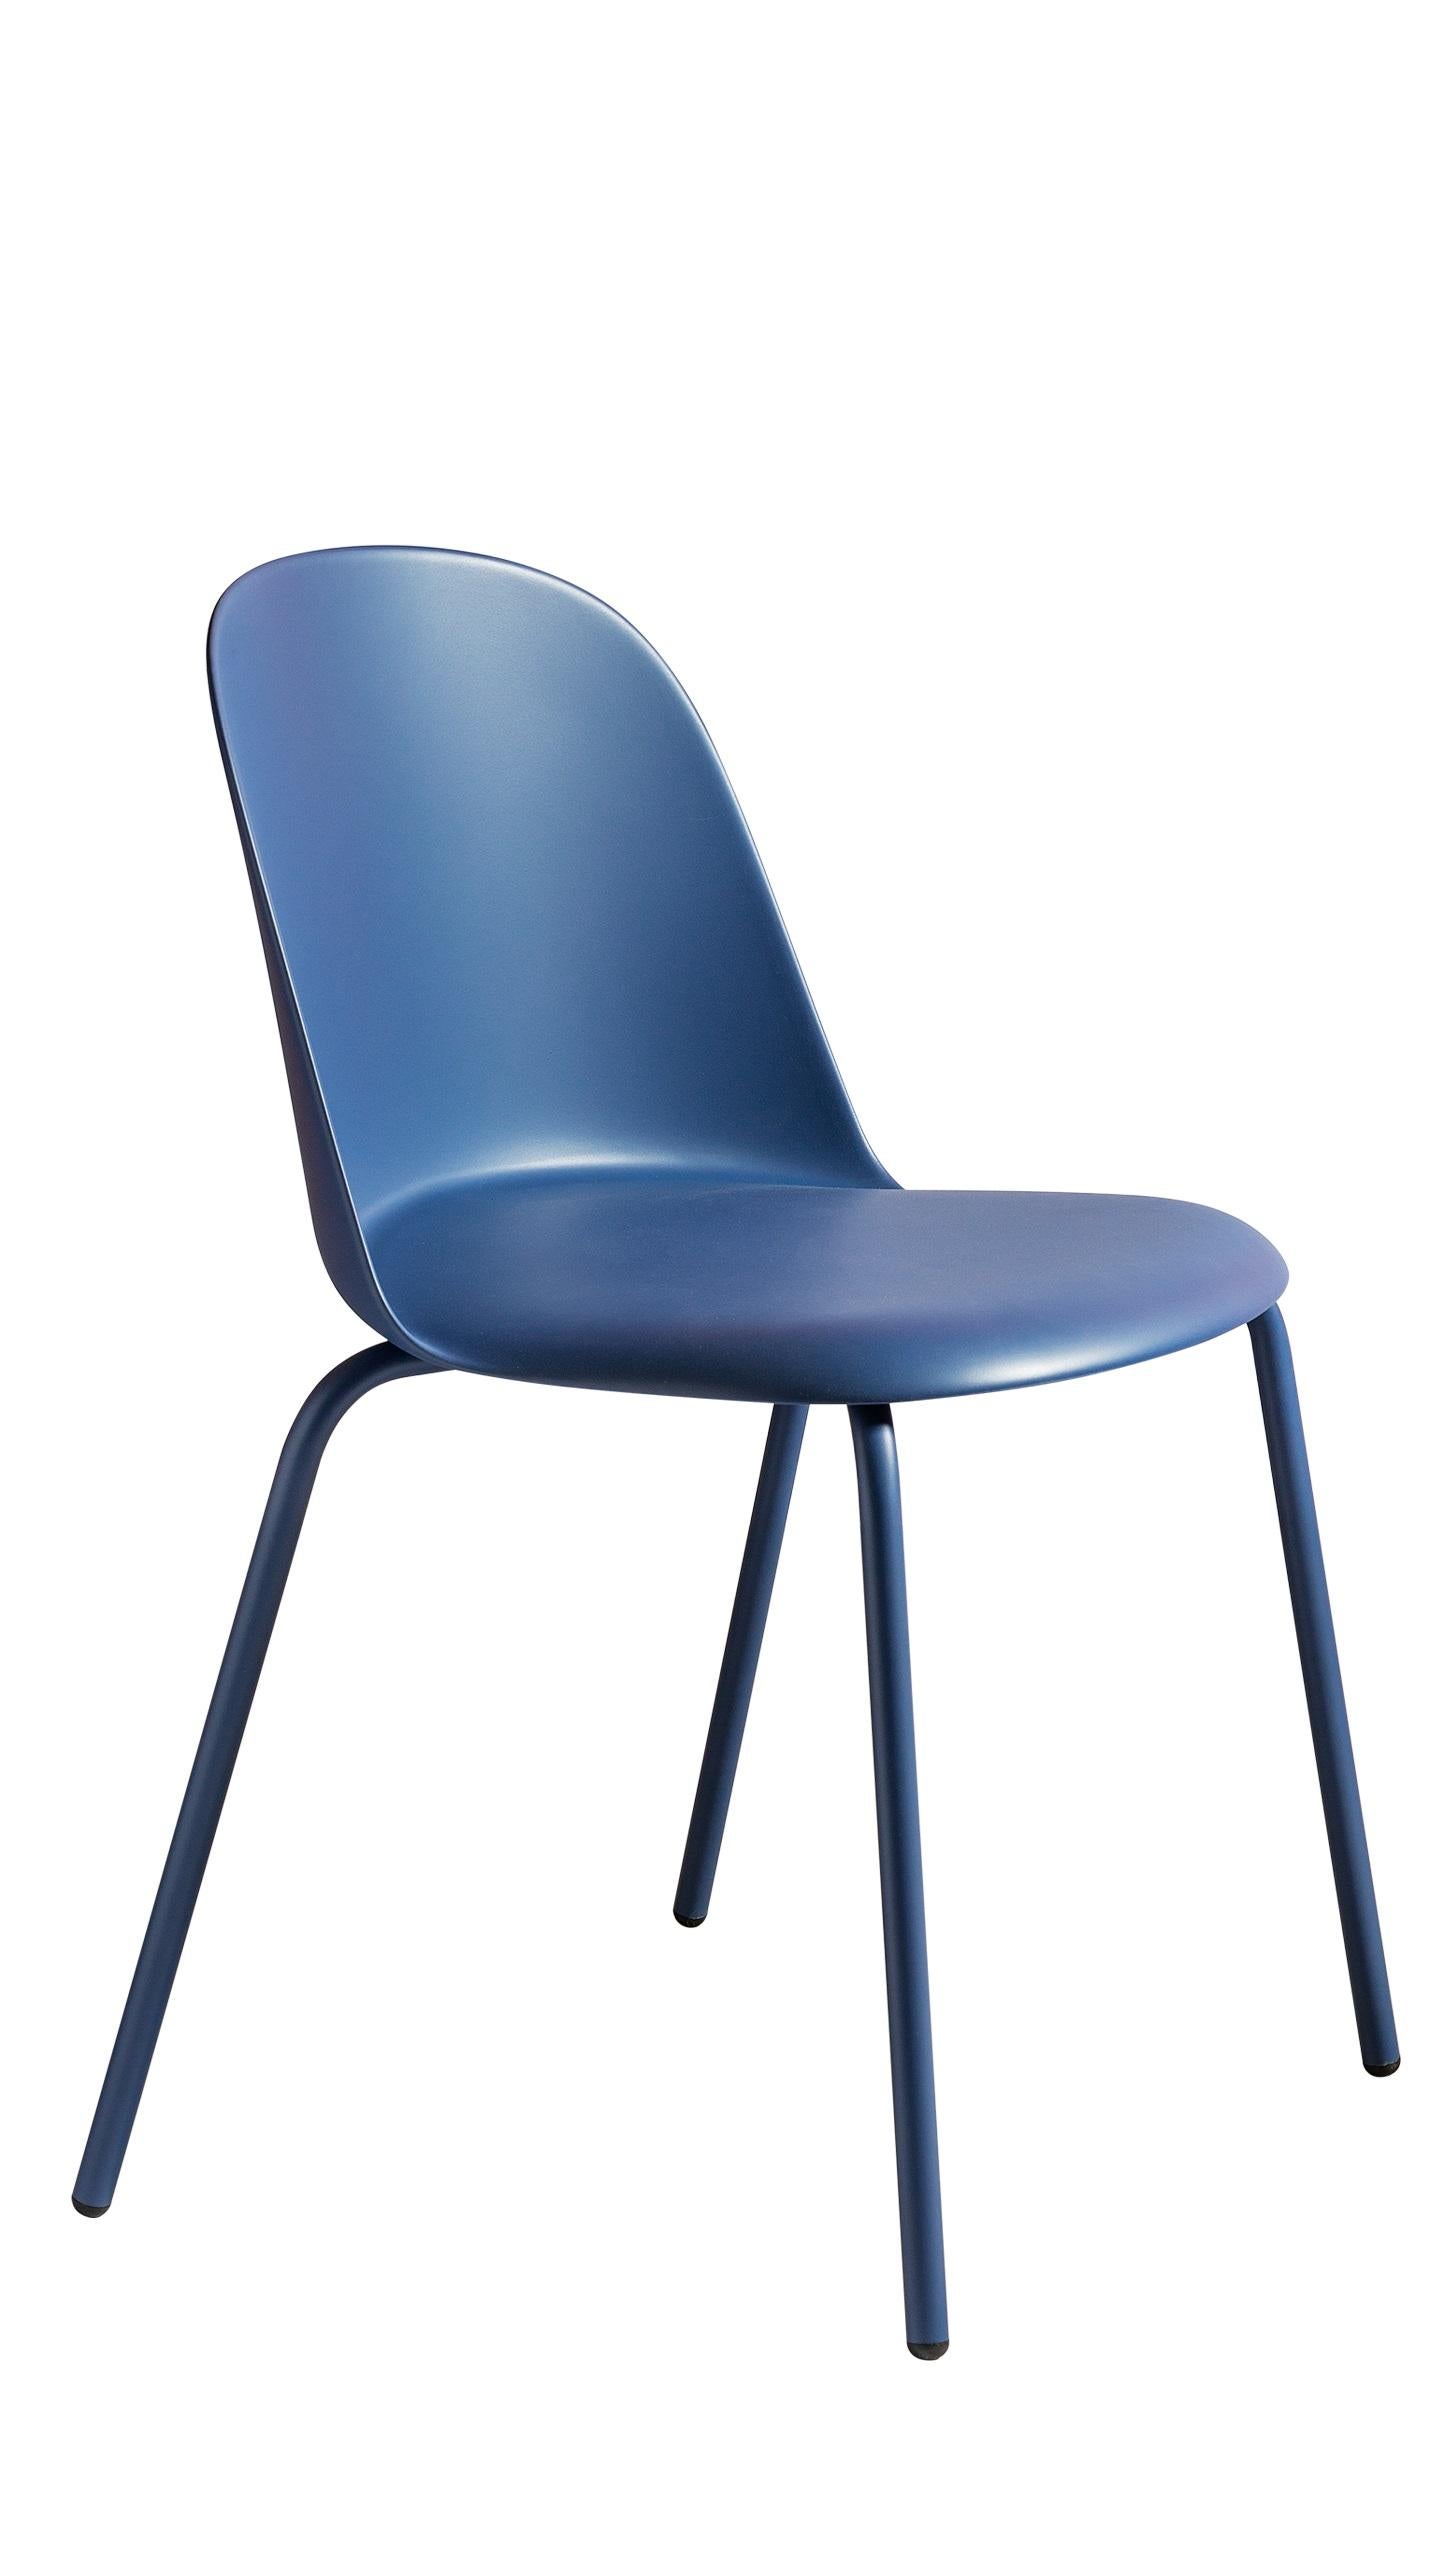 For Sale: Blue (Polypropylene Intense Blue) Mariolina Chair in Matching Iron Legs and Polypropylene Seat, by E-GGs 2